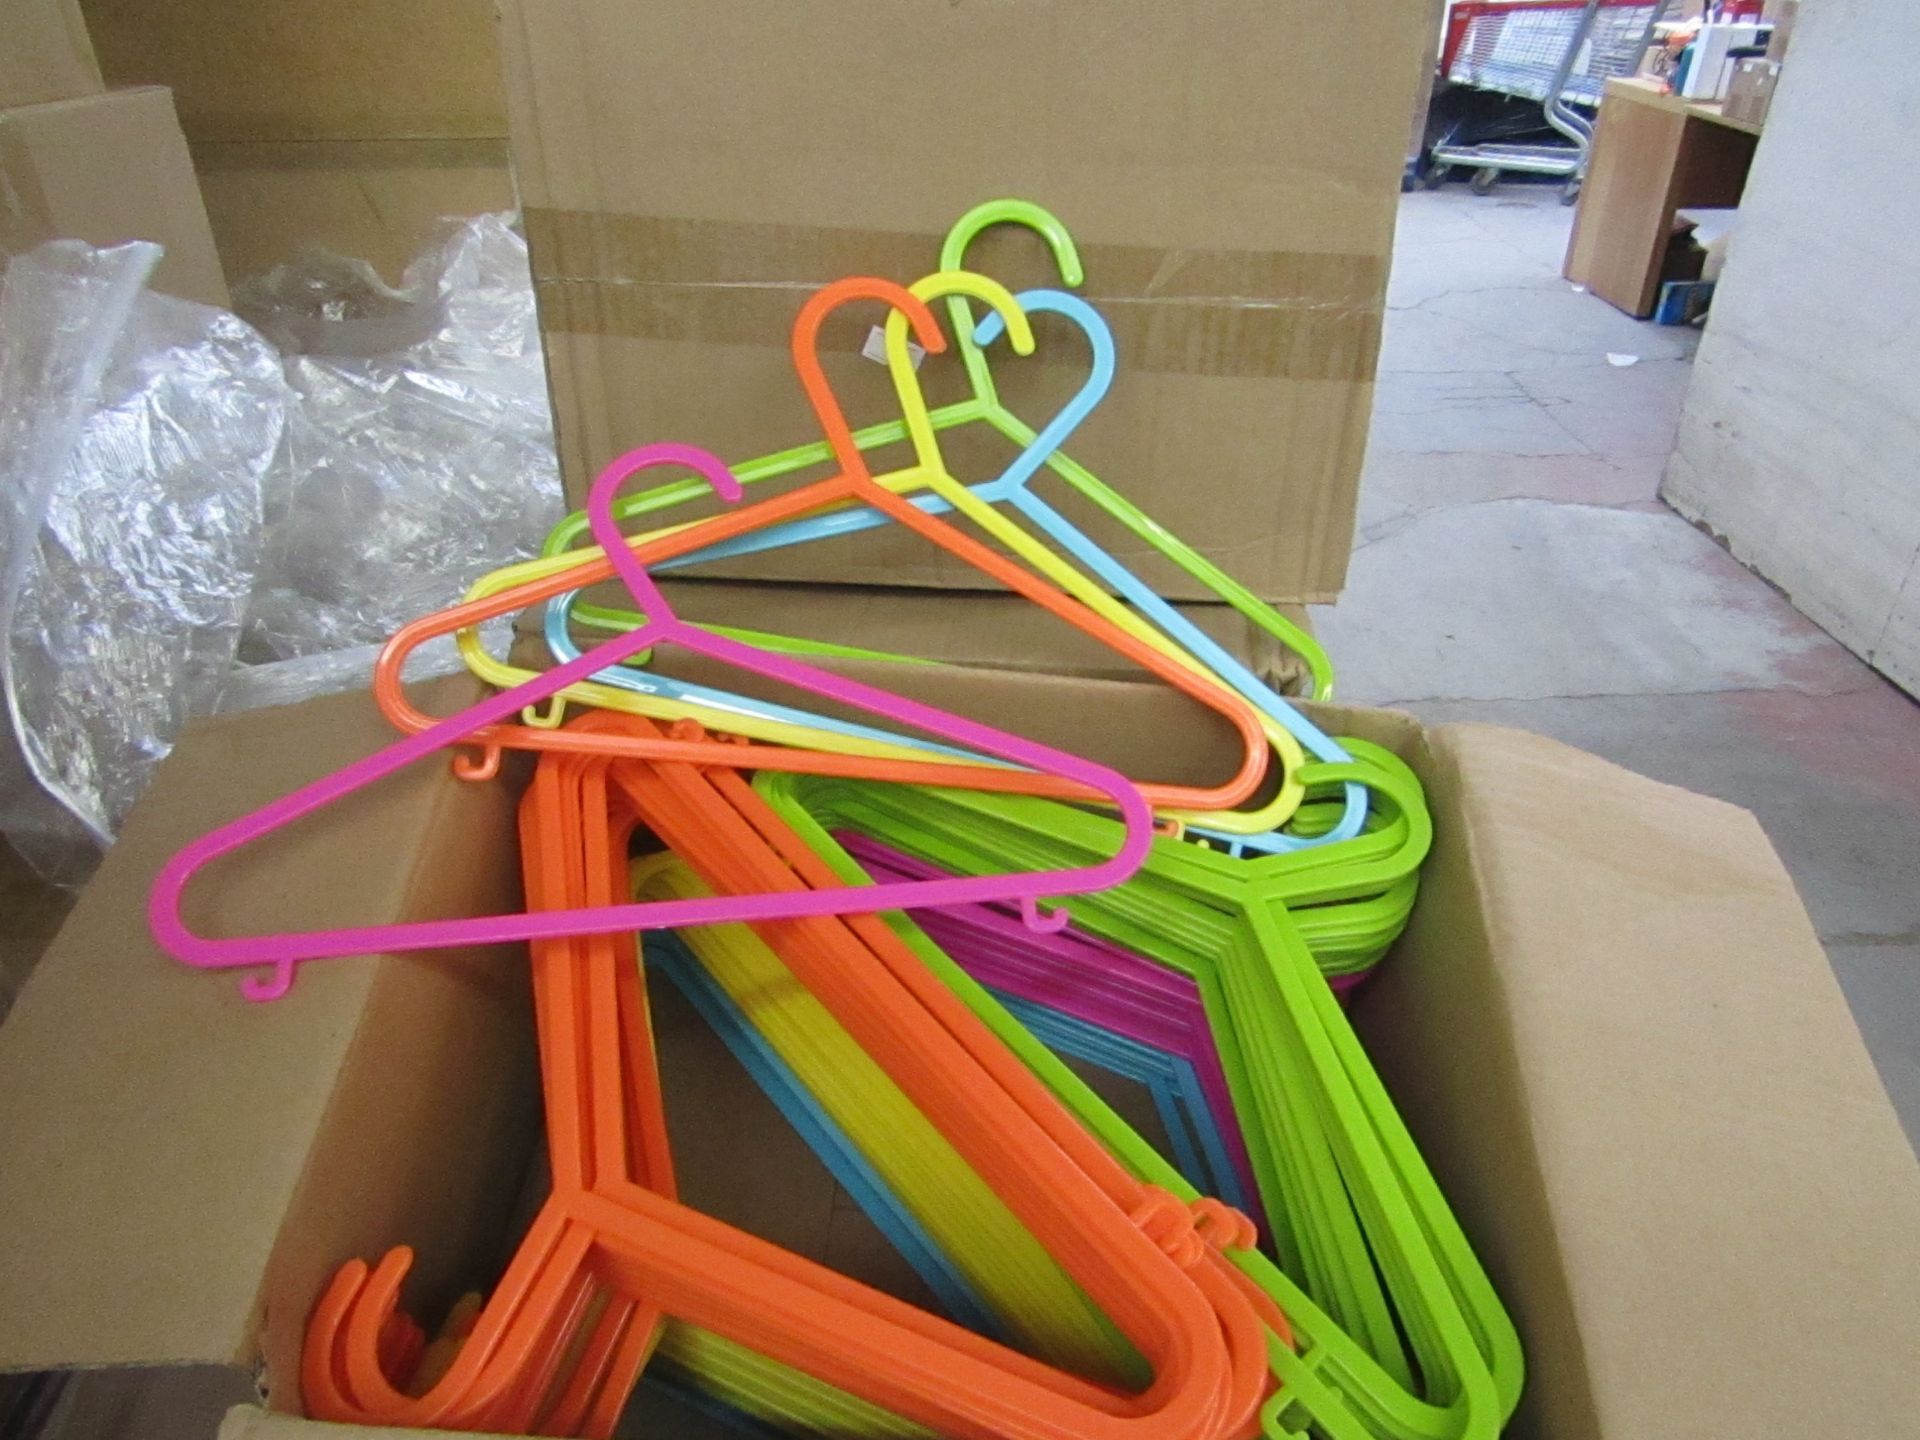 Box of 100 Mixed Bright coloured Childrens Clothes Hangers, new